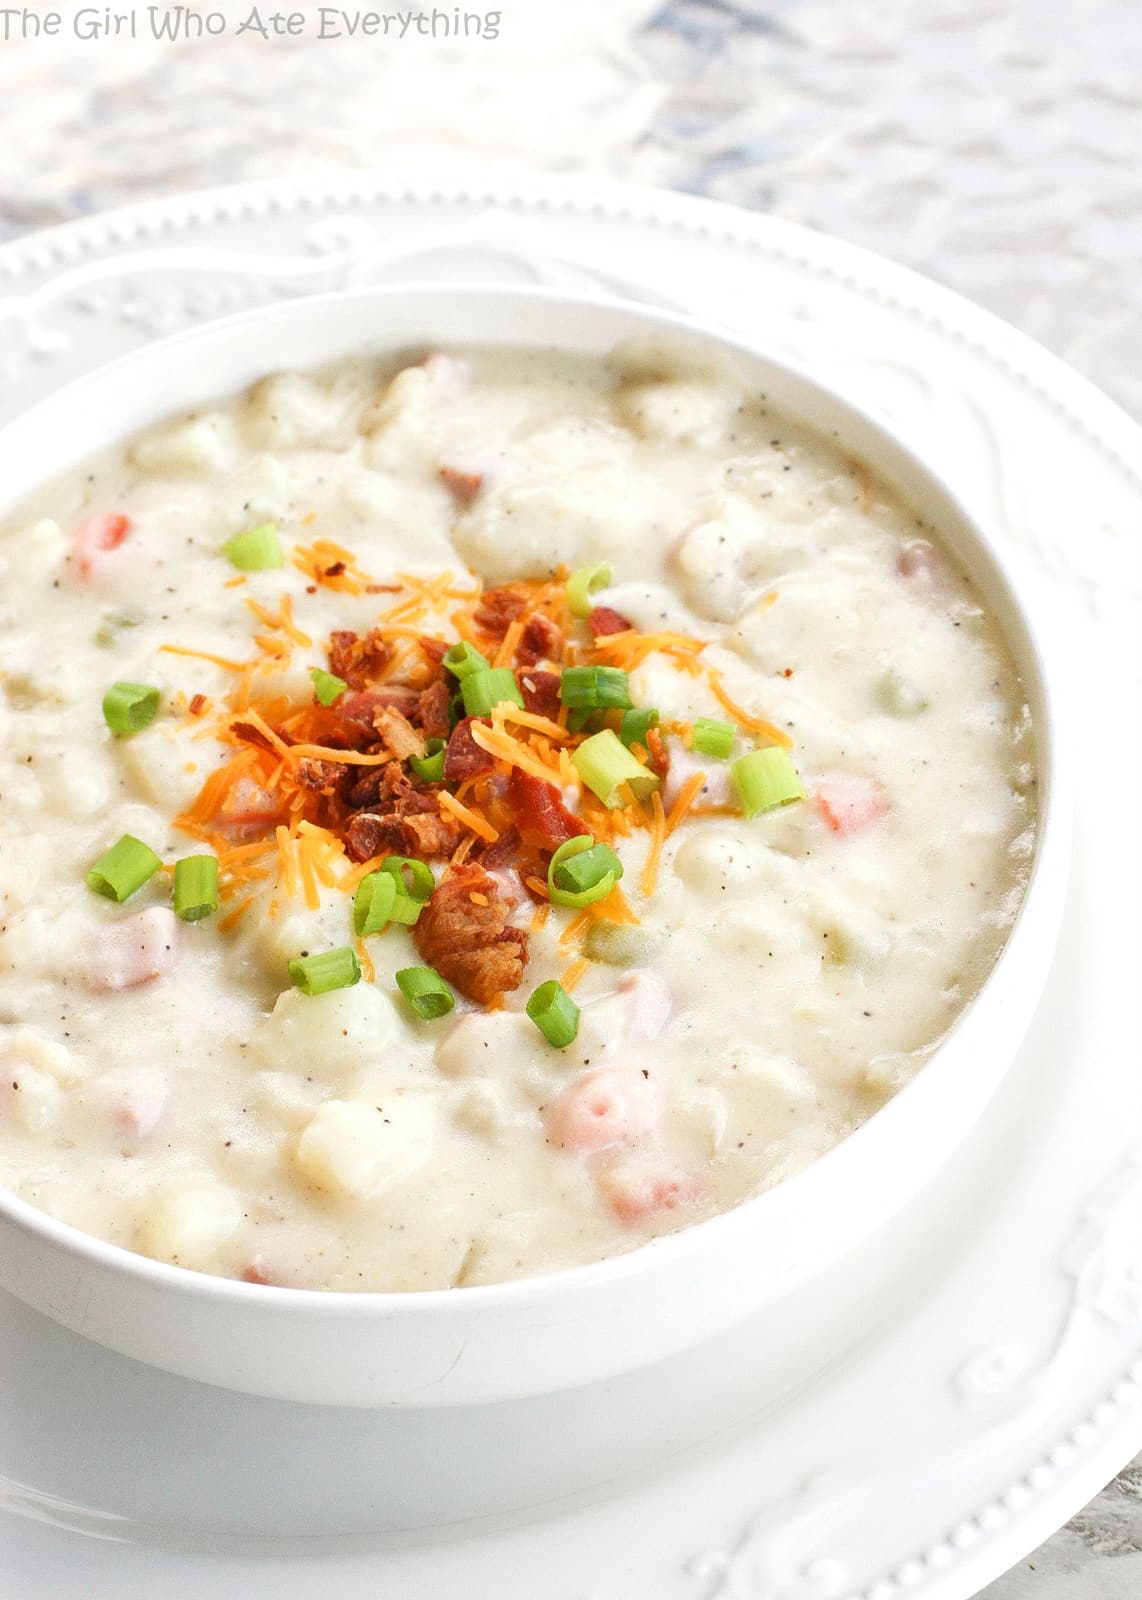 Ham and Potato Soup - so comforting and warm on a cold day!